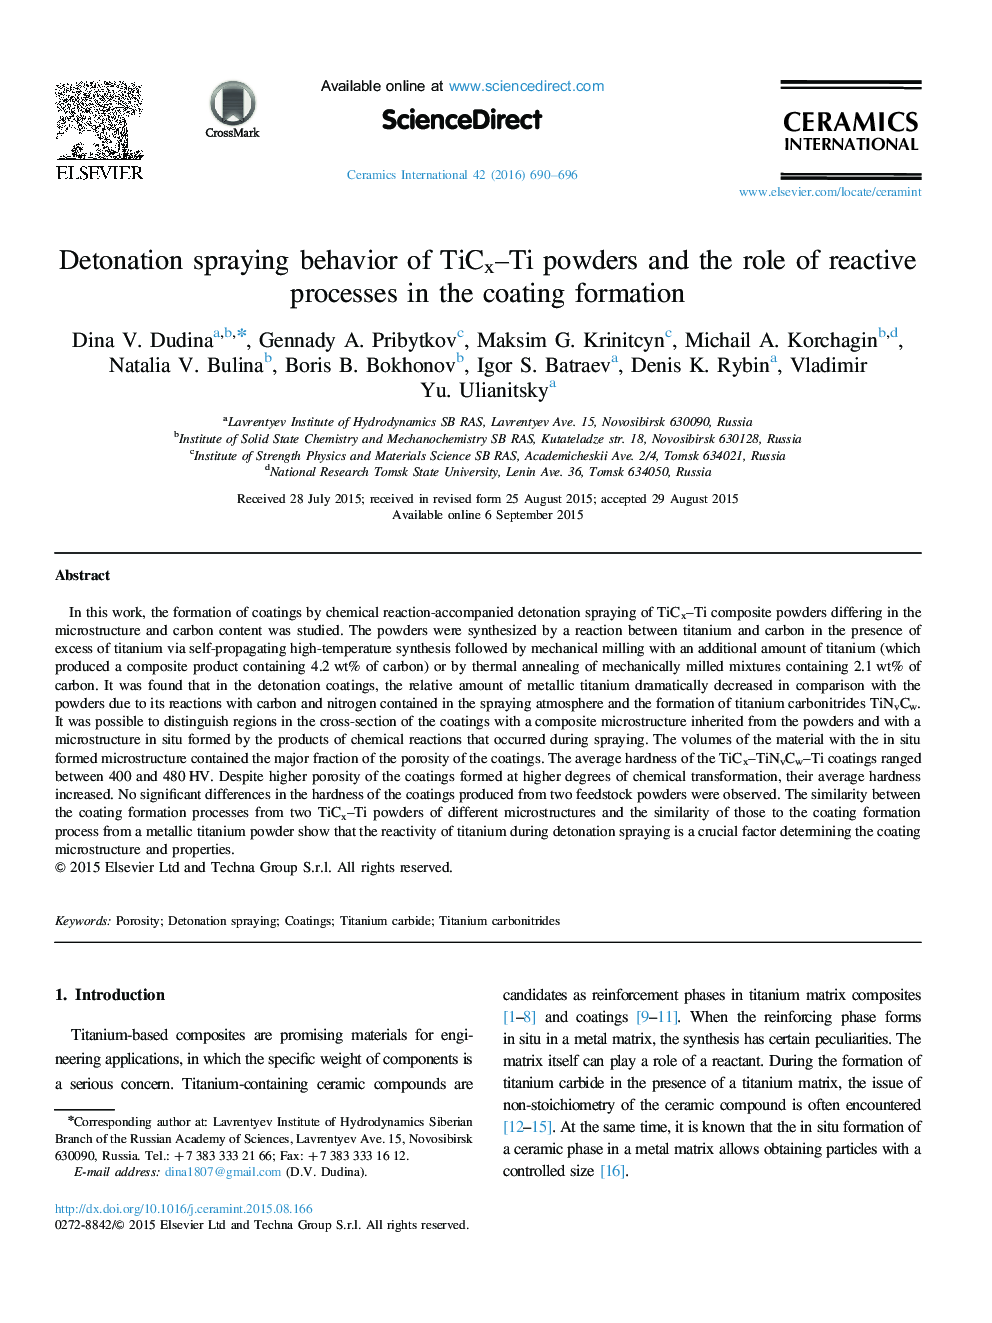 Detonation spraying behavior of TiCx–Ti powders and the role of reactive processes in the coating formation